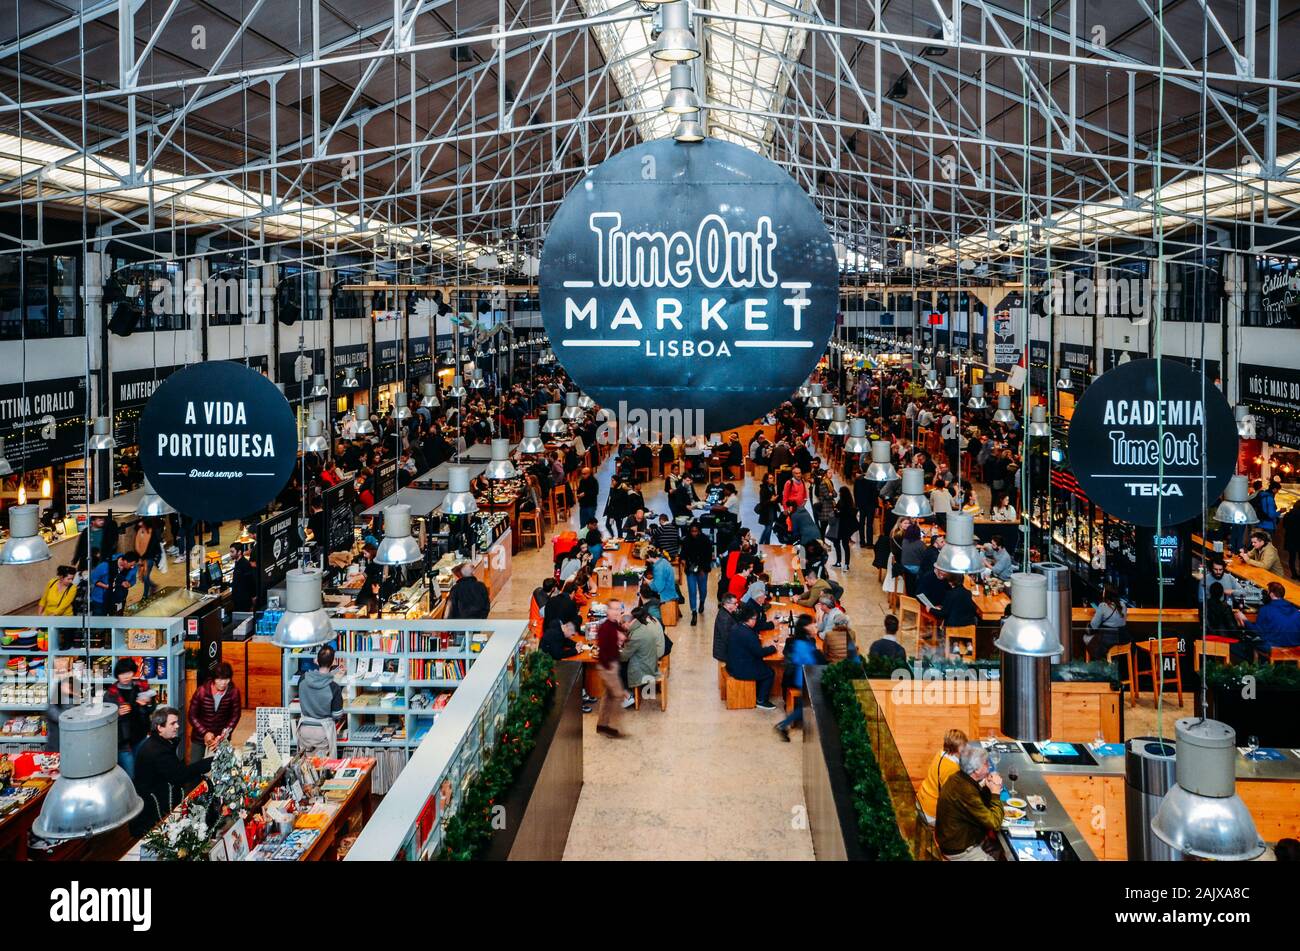 Lisbon, Portugal - Jan 3, 2020: Time Out Market is a food hall located in Mercado da Ribeira at Cais do Sodre in Lisbon and is a major touristic attra Stock Photo